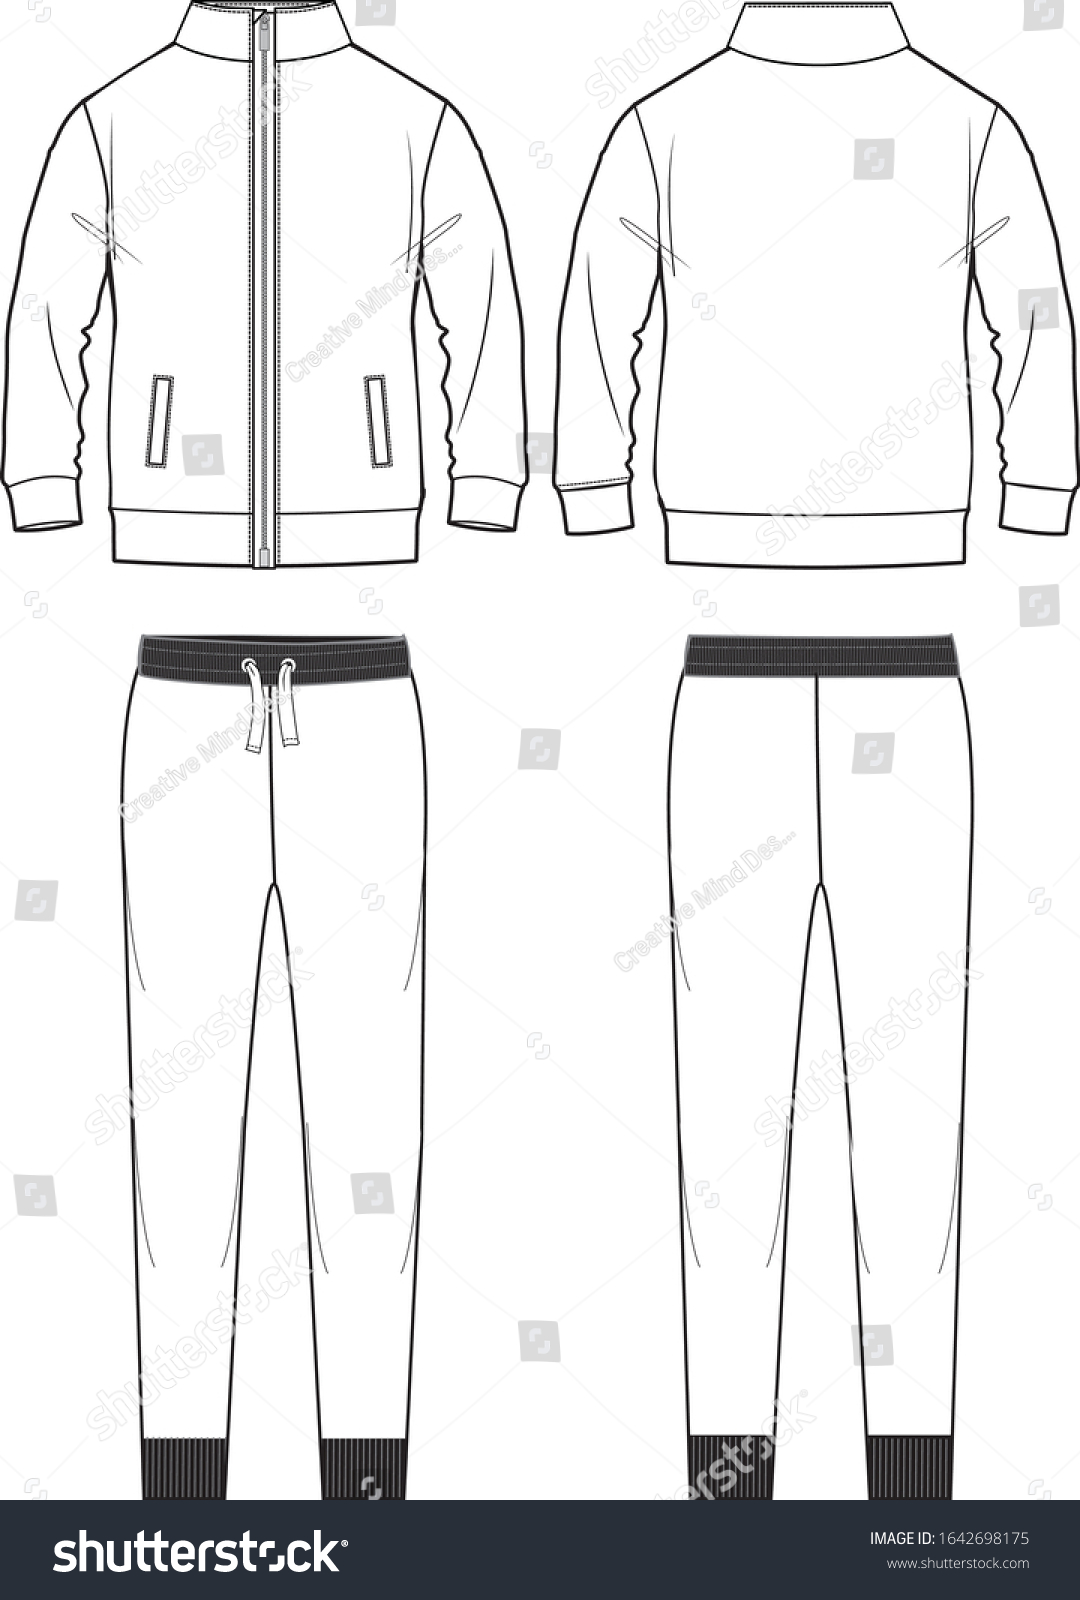 Sweat Suit Fashion Flat Templates Stock Vector (Royalty Free) 1642698175